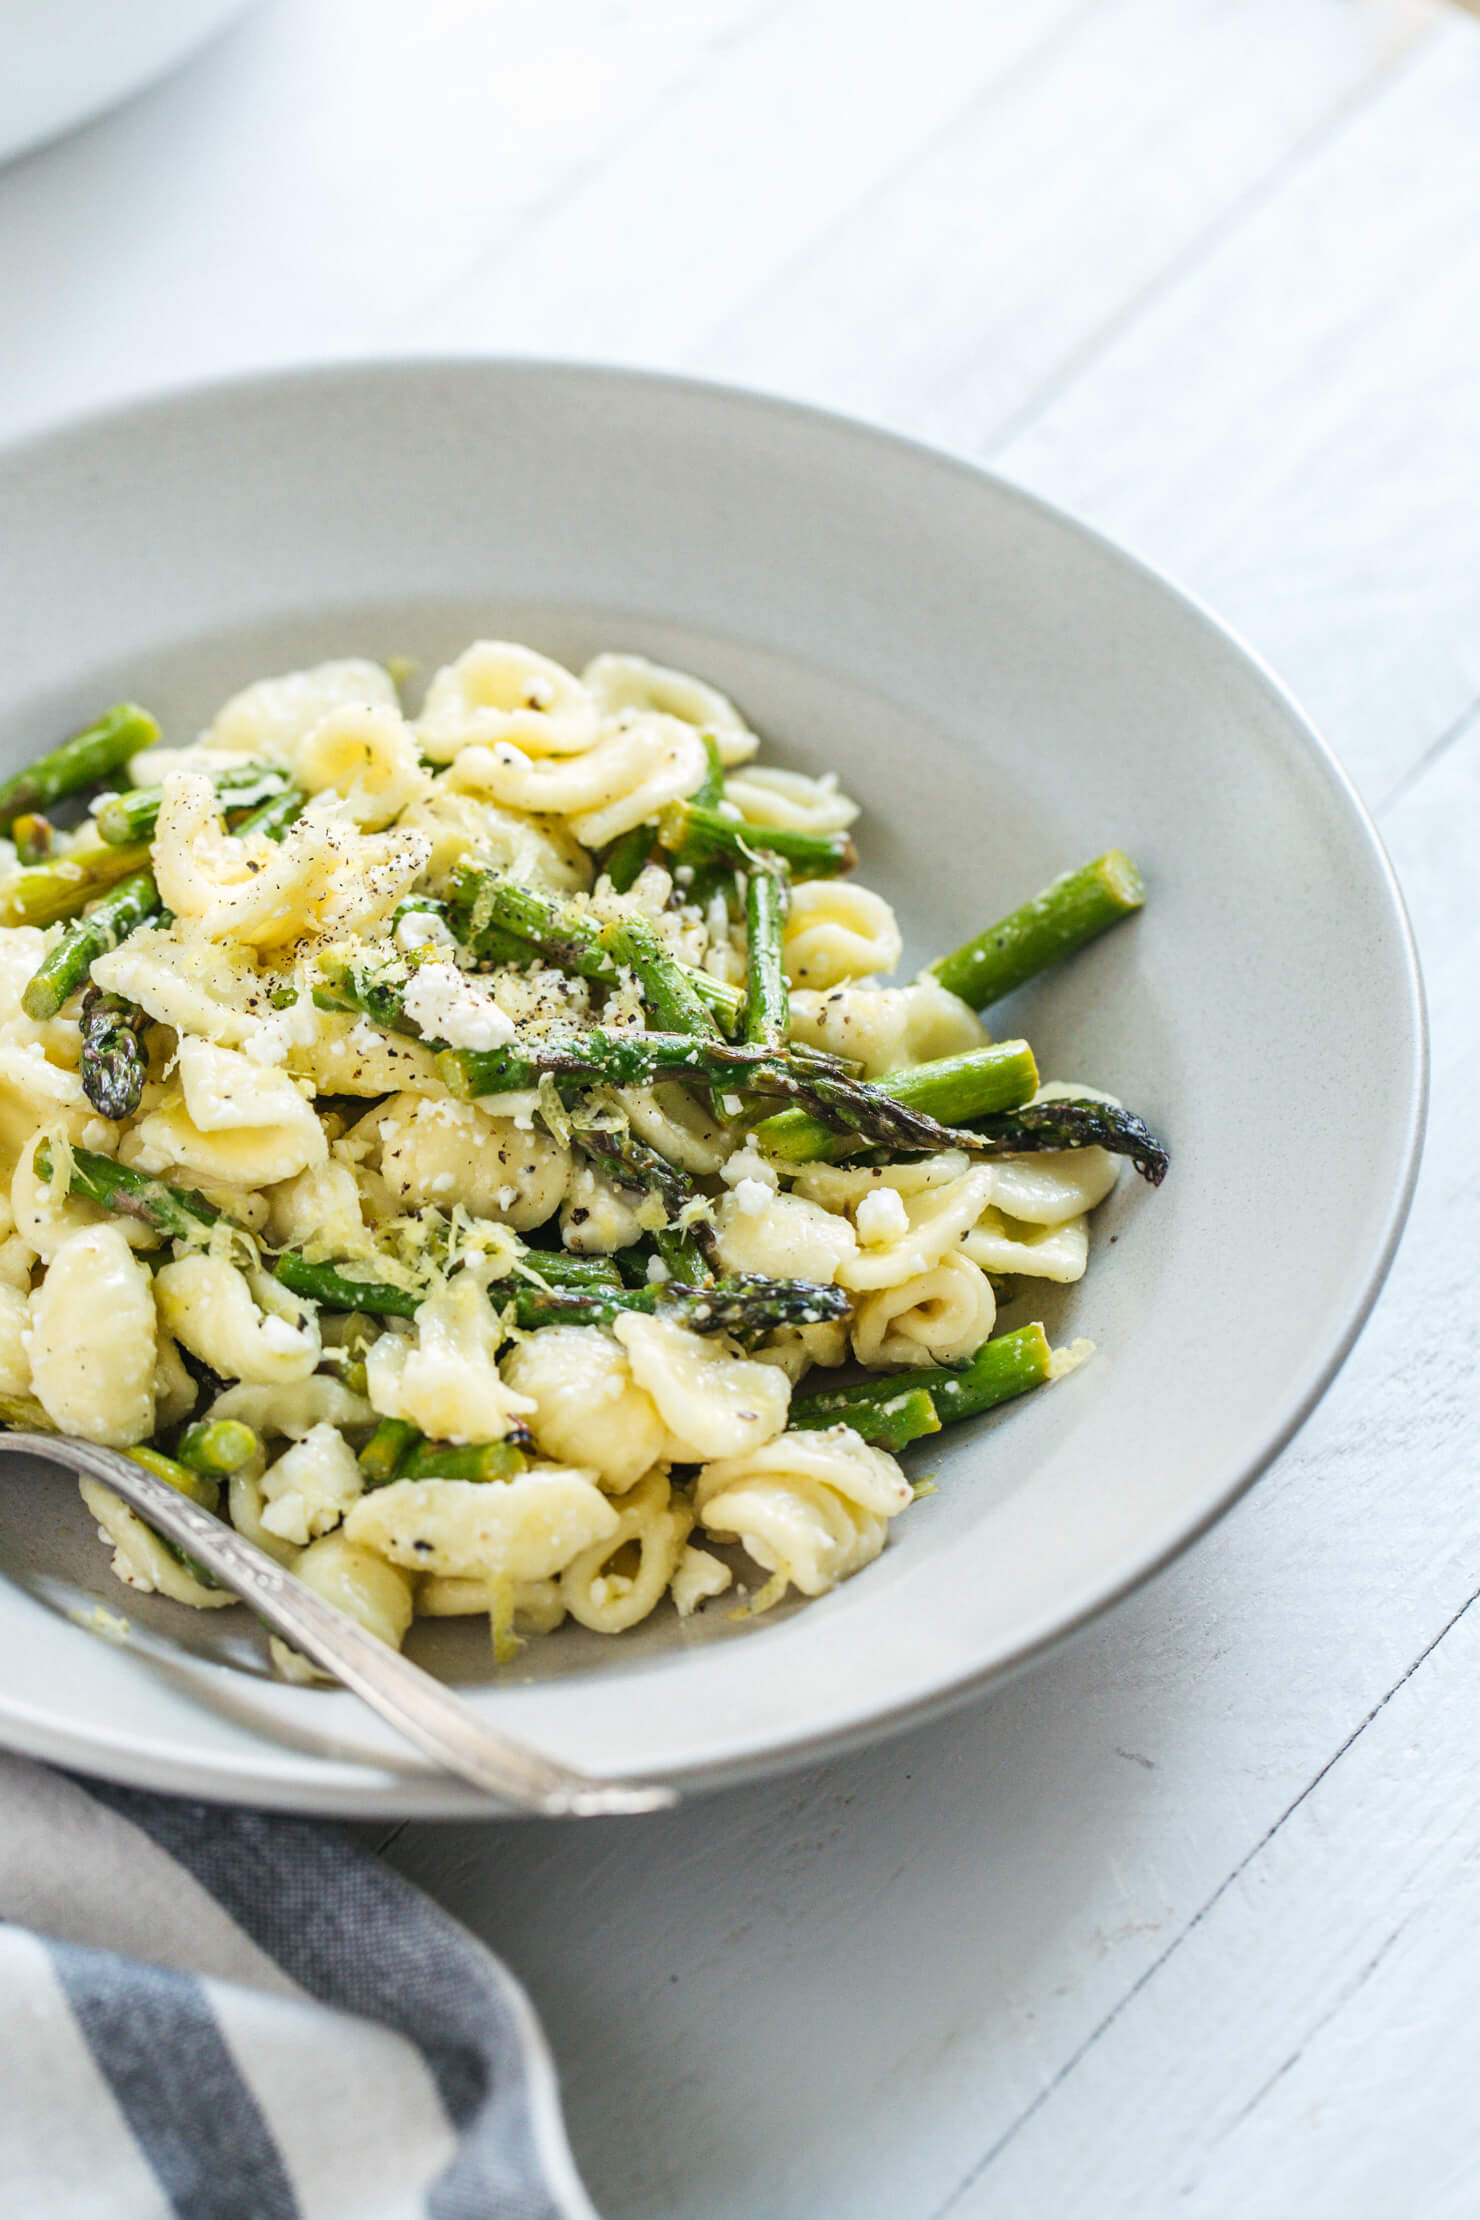 Orecchiette with Roasted Asparagus and Feta, healthy meal ideas